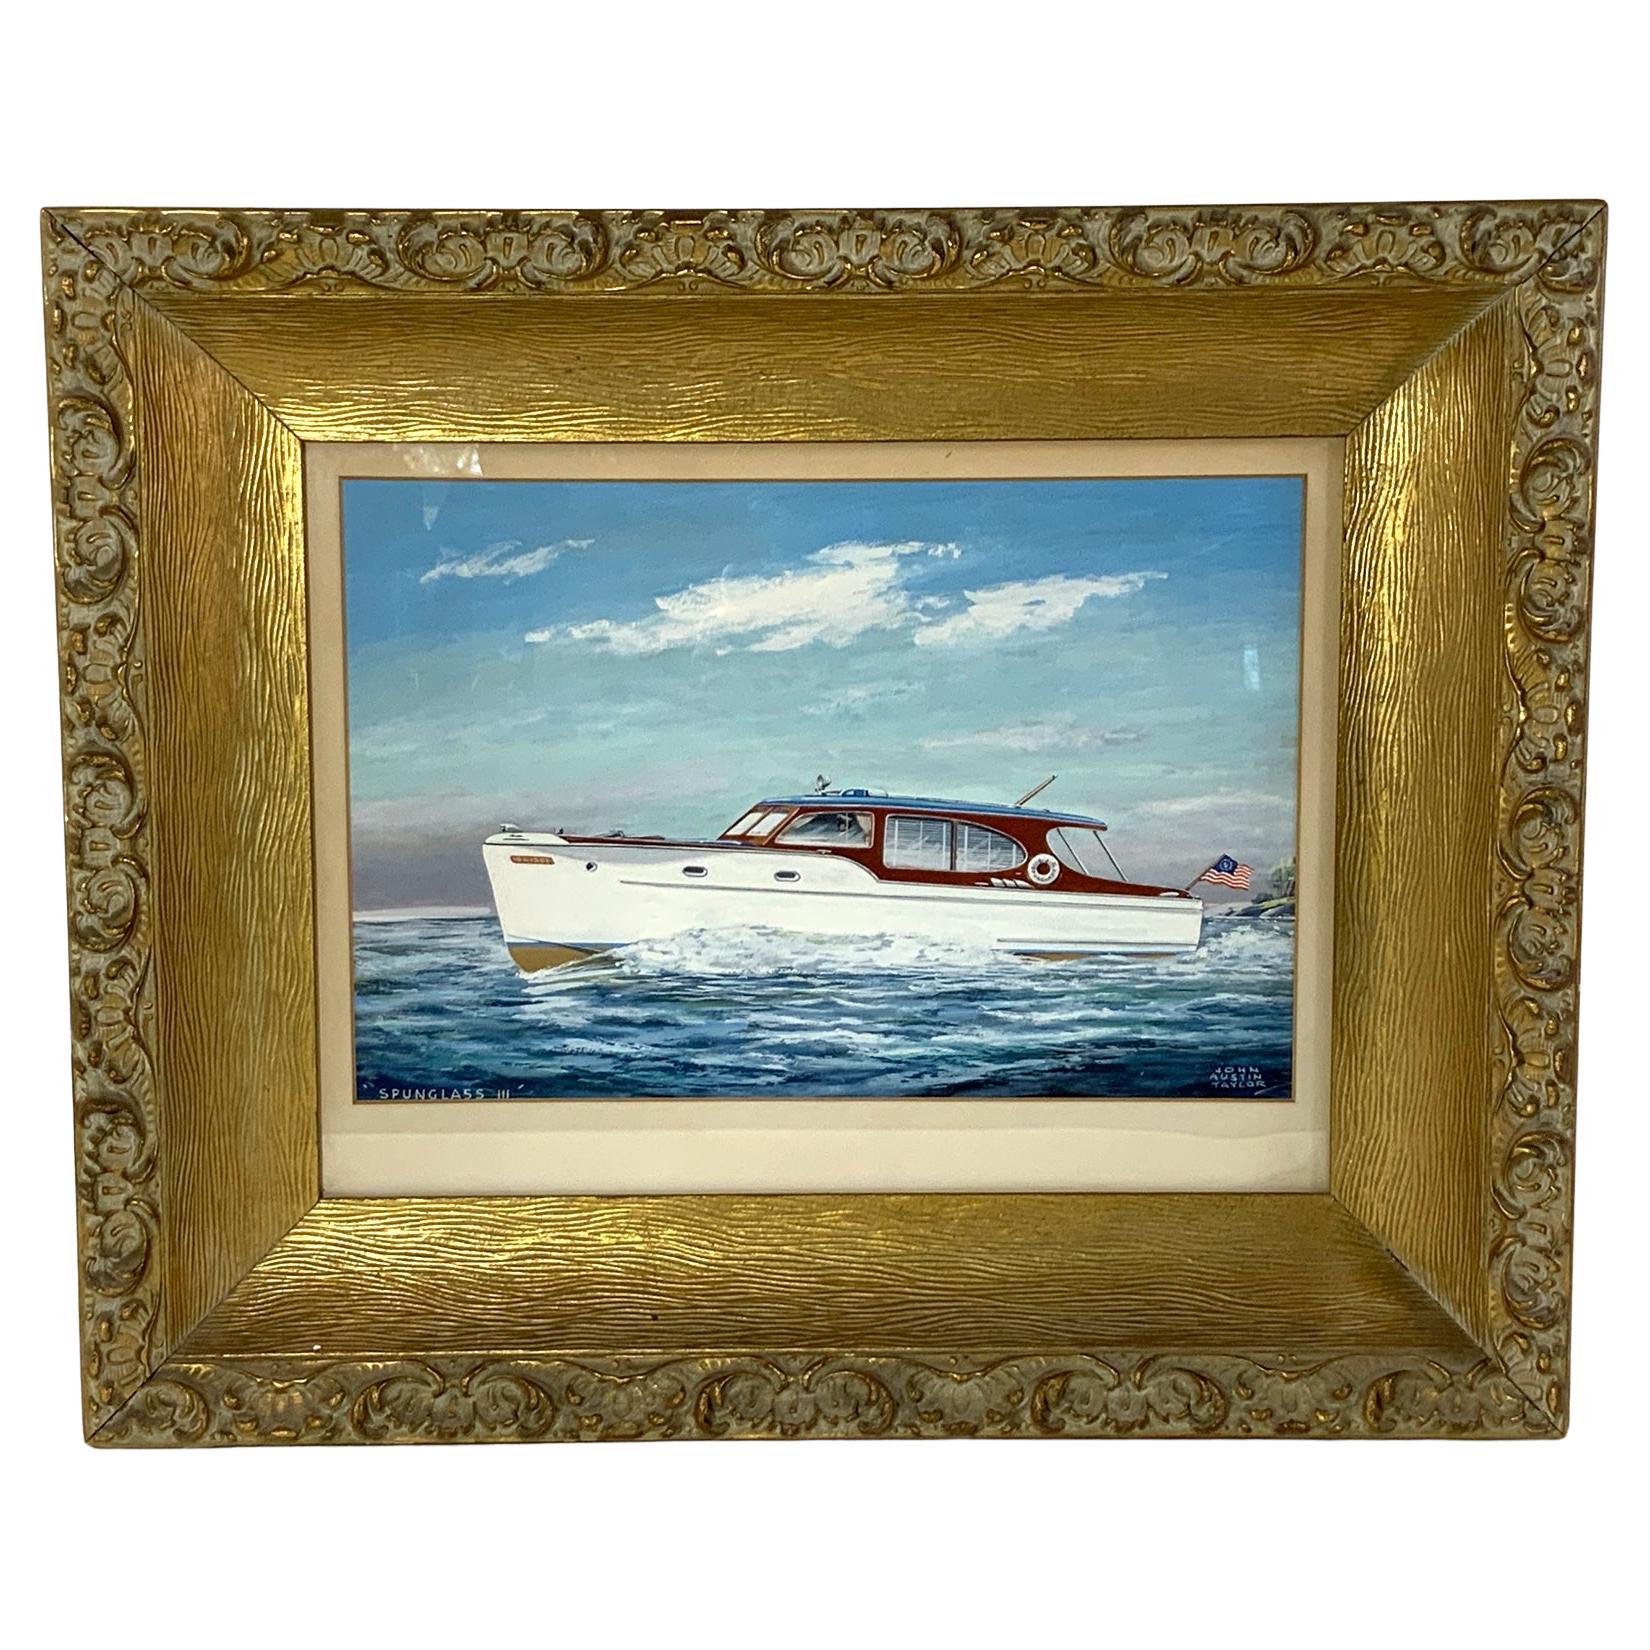 Painting of the Cabin Cruiser Spun Glass III For Sale